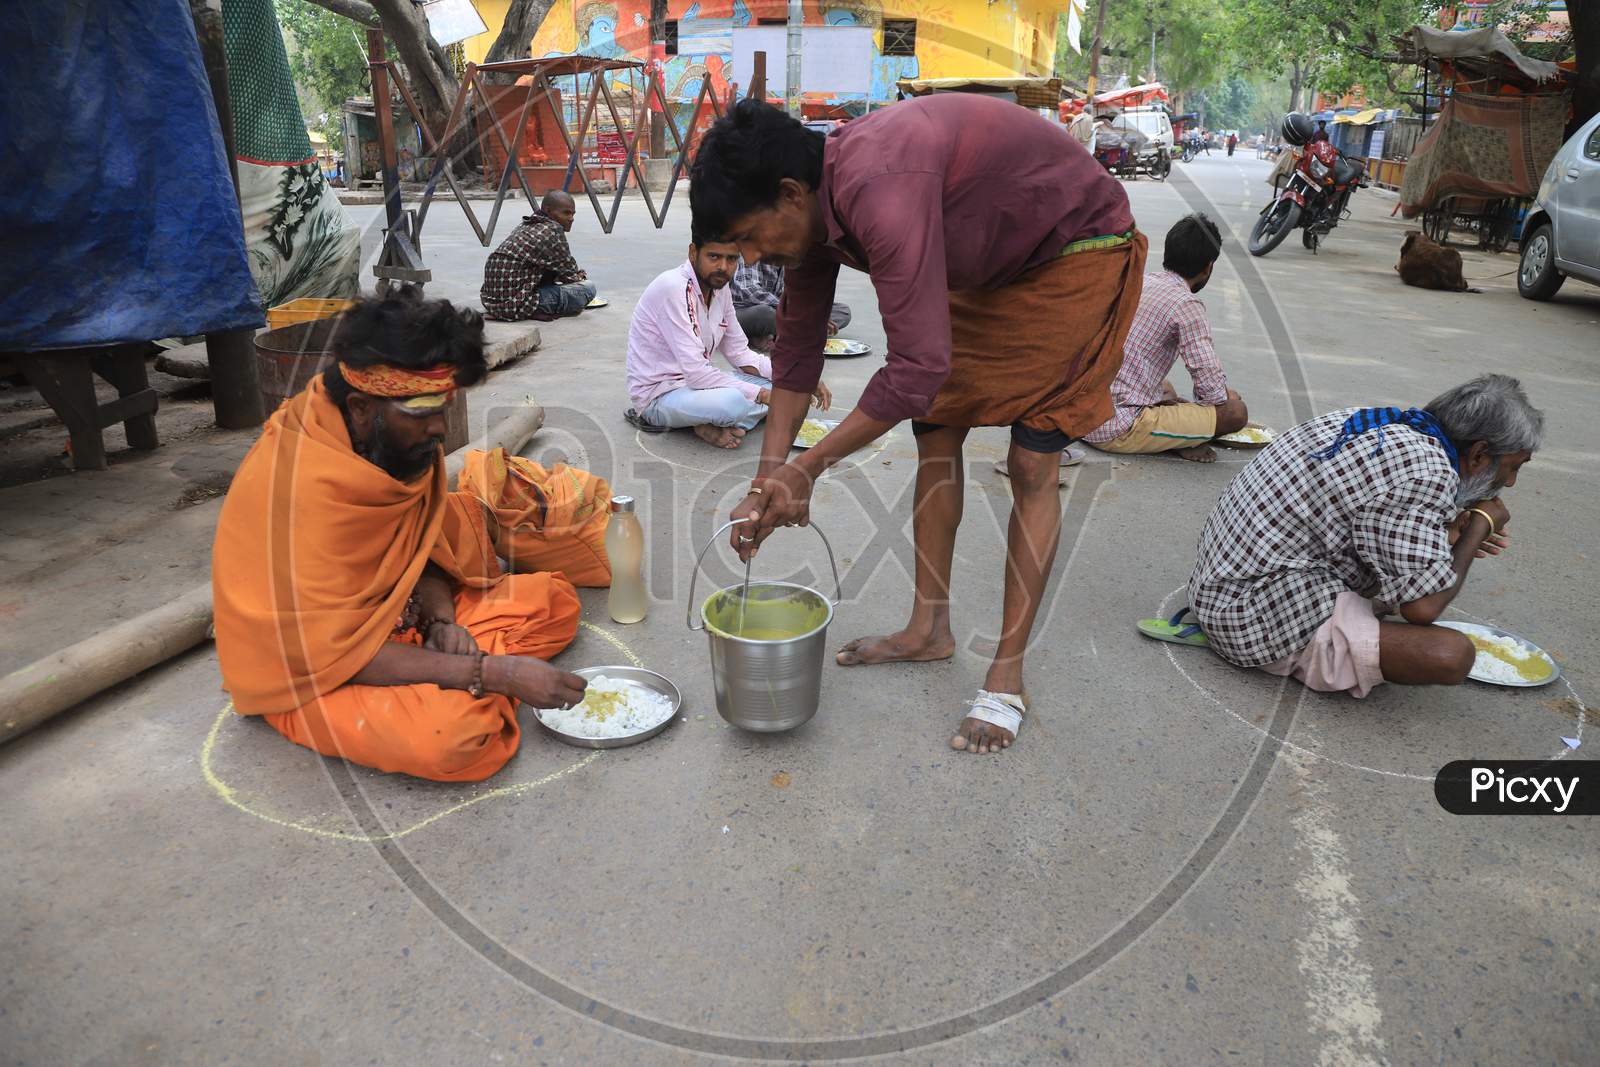 Homeless People Site Inside Circles Drawn On A Road For People To Maintain Safe Distance To Eat Food During A 21-Day Nationwide Lockdown To Slow The Spreading Of Coronavirus Disease (Covid-19) In Prayagraj, April 8, 2020.